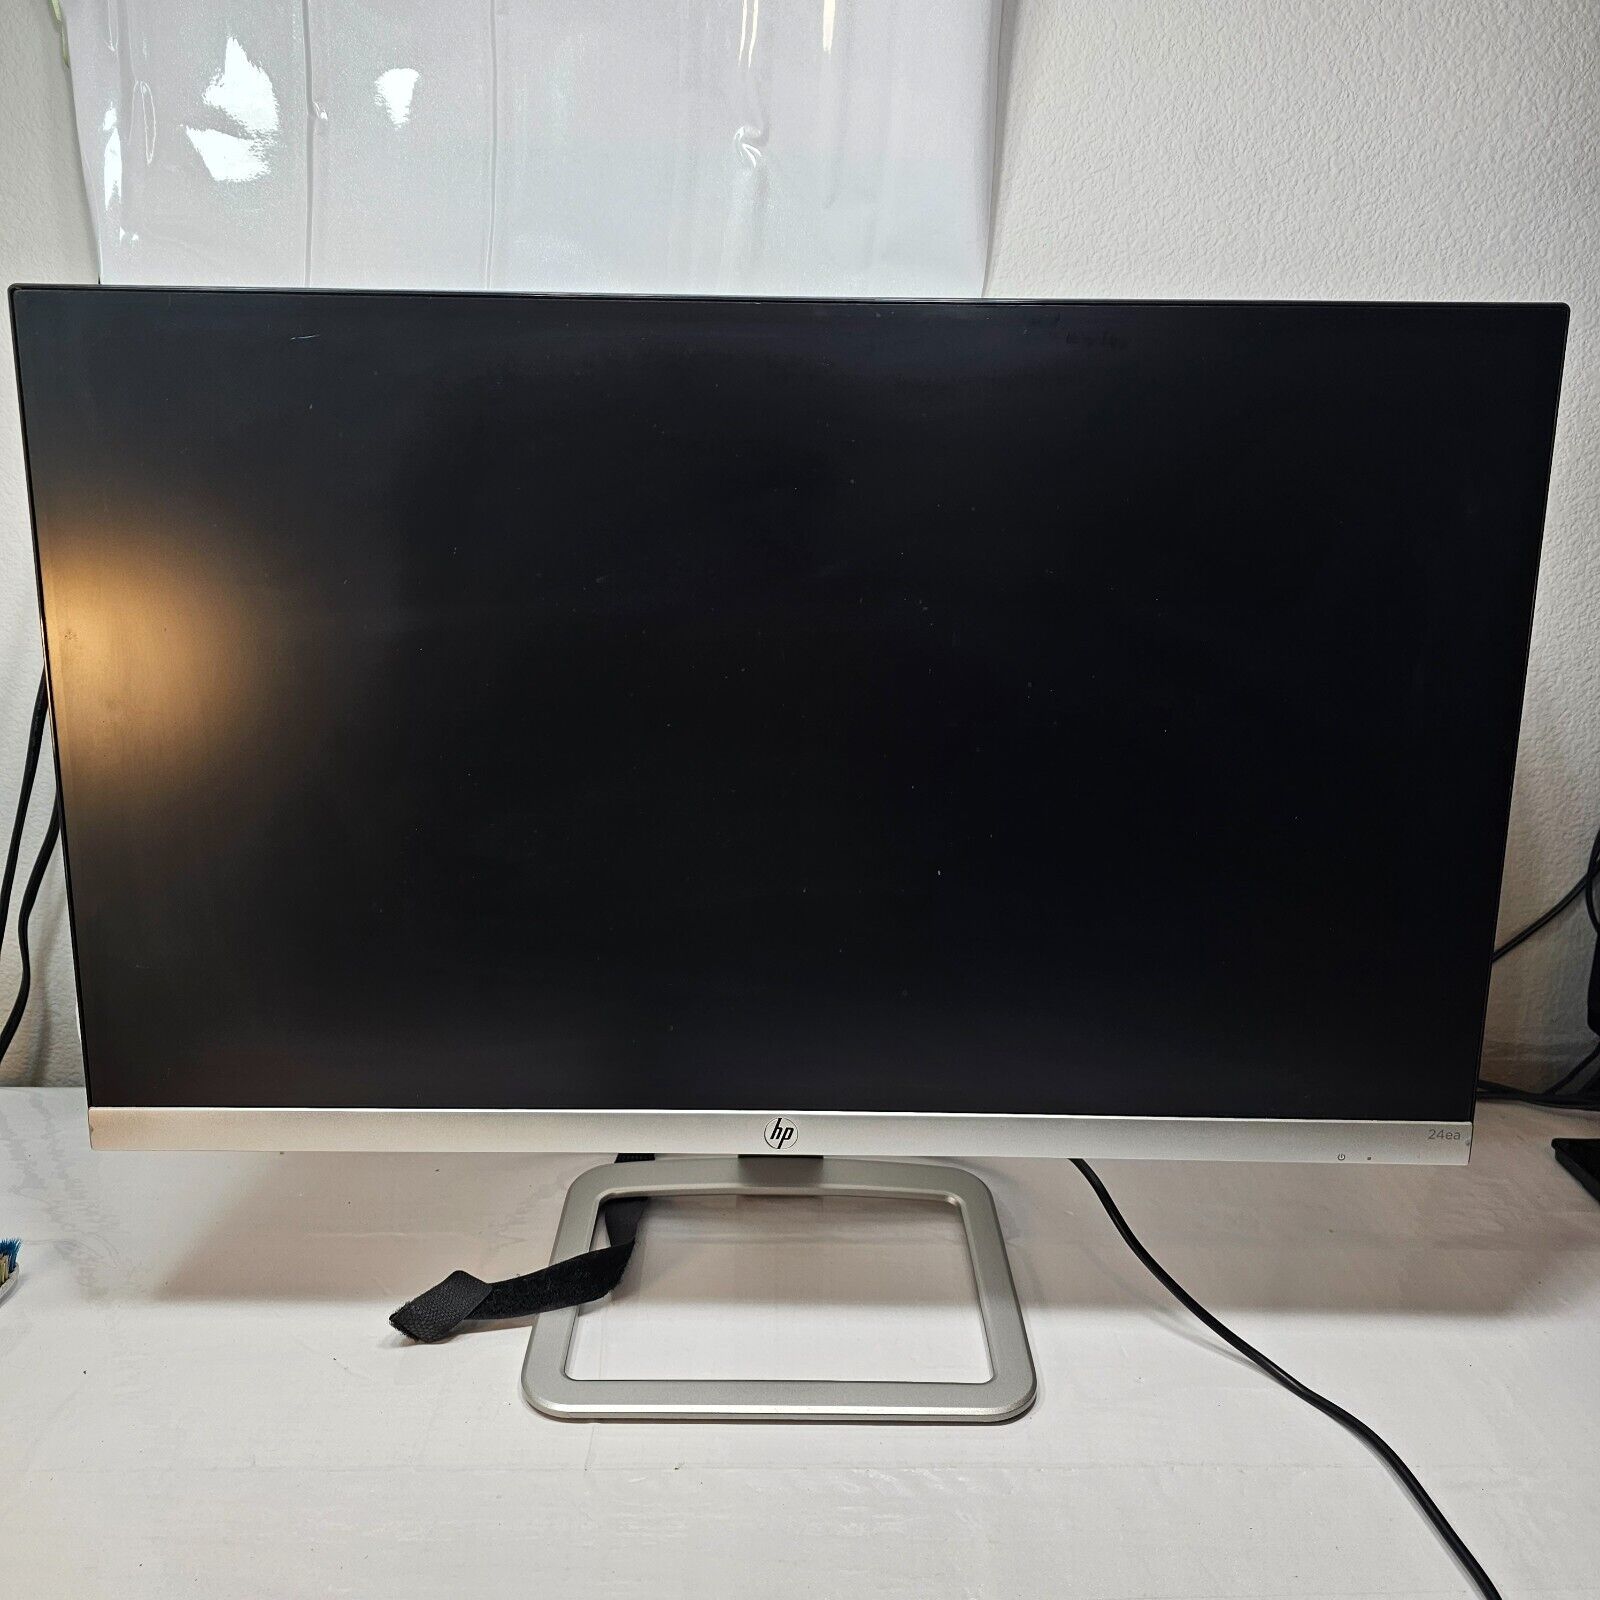 HP 24ea 23.8-inch Display Monitor - Tested and working